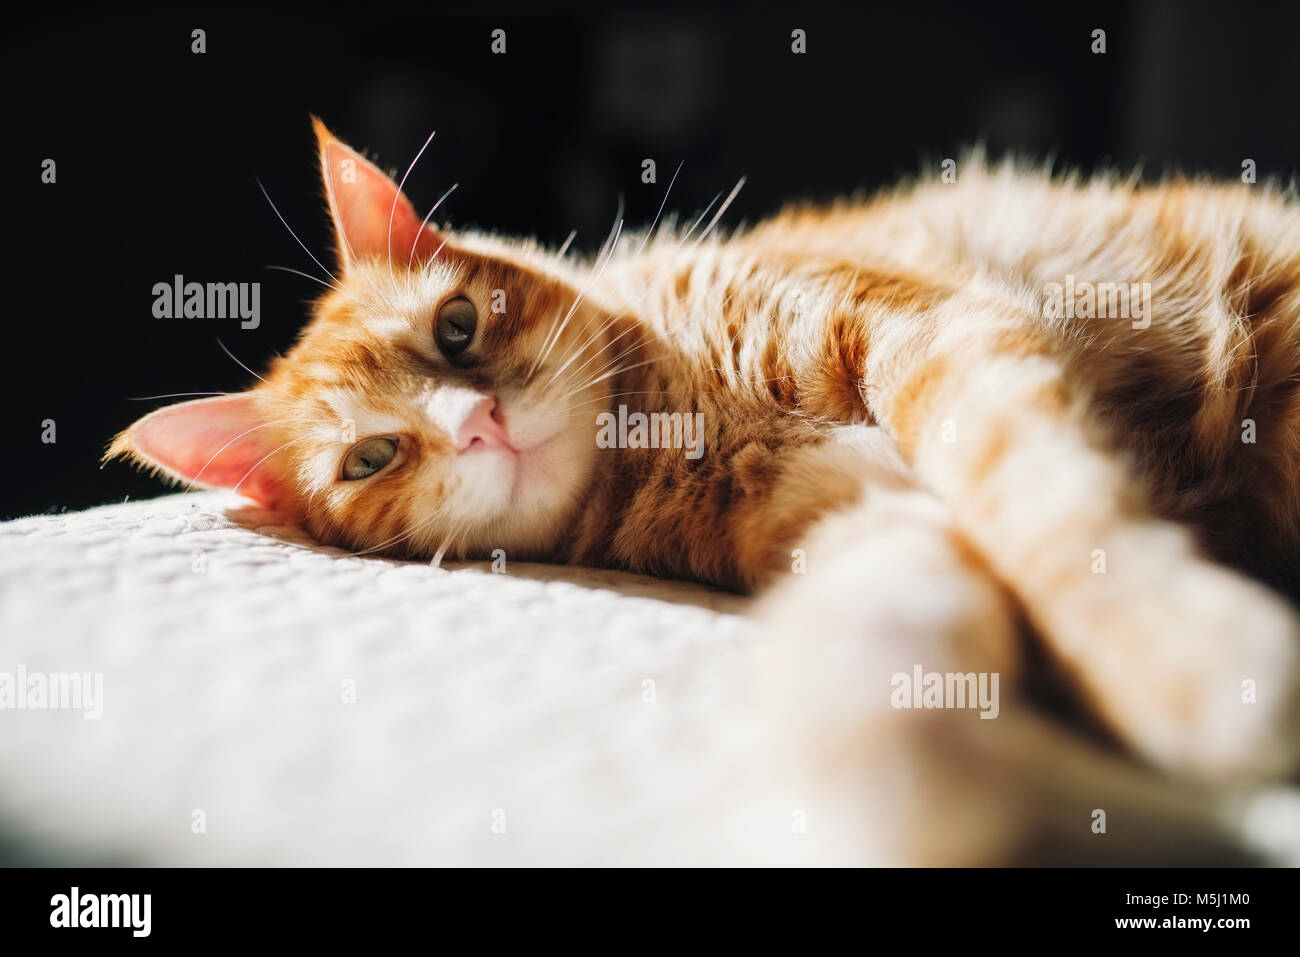 Ginger tabby cat resting on a blanket at home Stock Photo